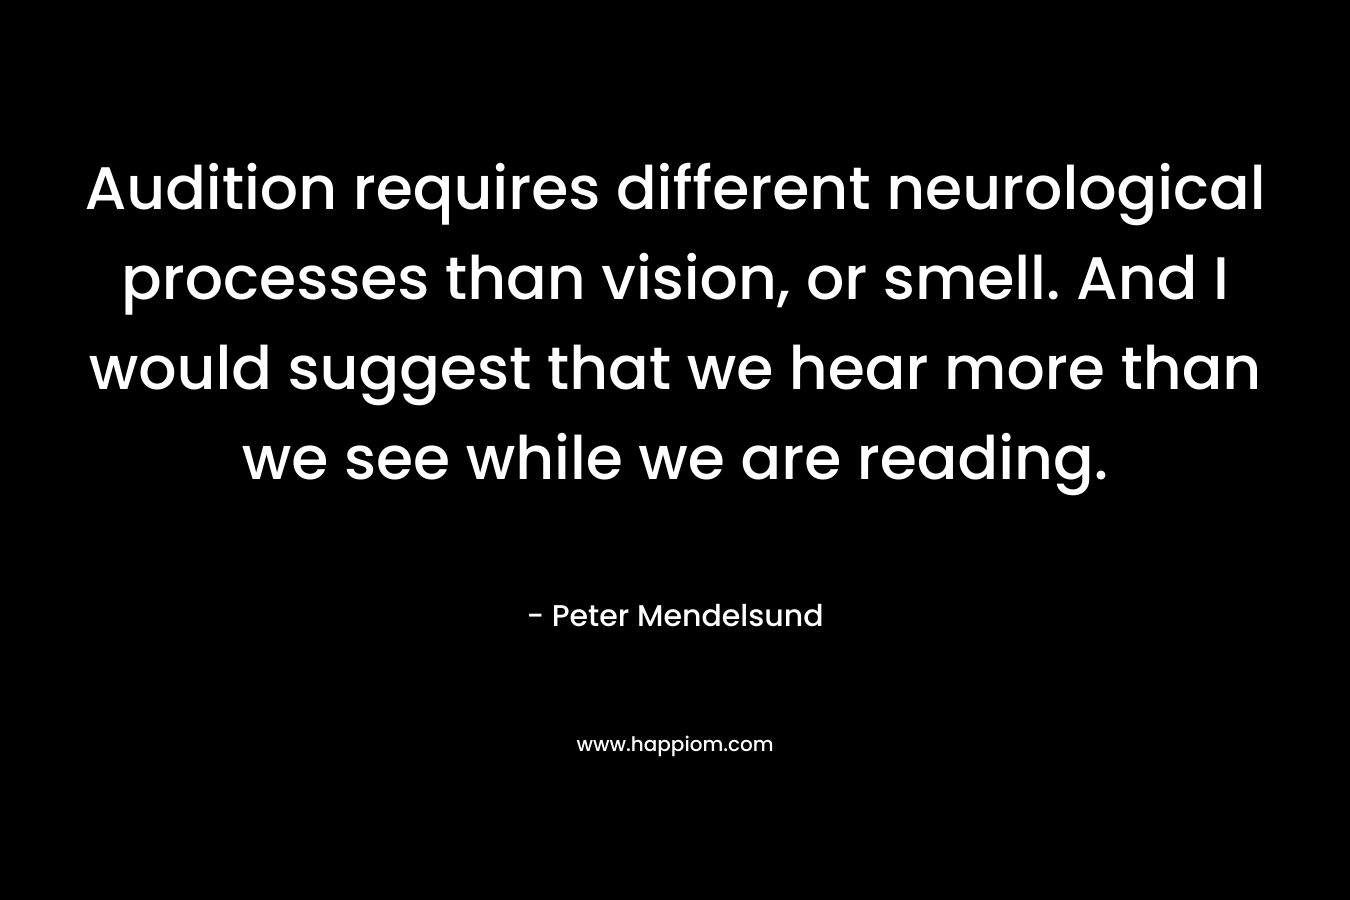 Audition requires different neurological processes than vision, or smell. And I would suggest that we hear more than we see while we are reading.